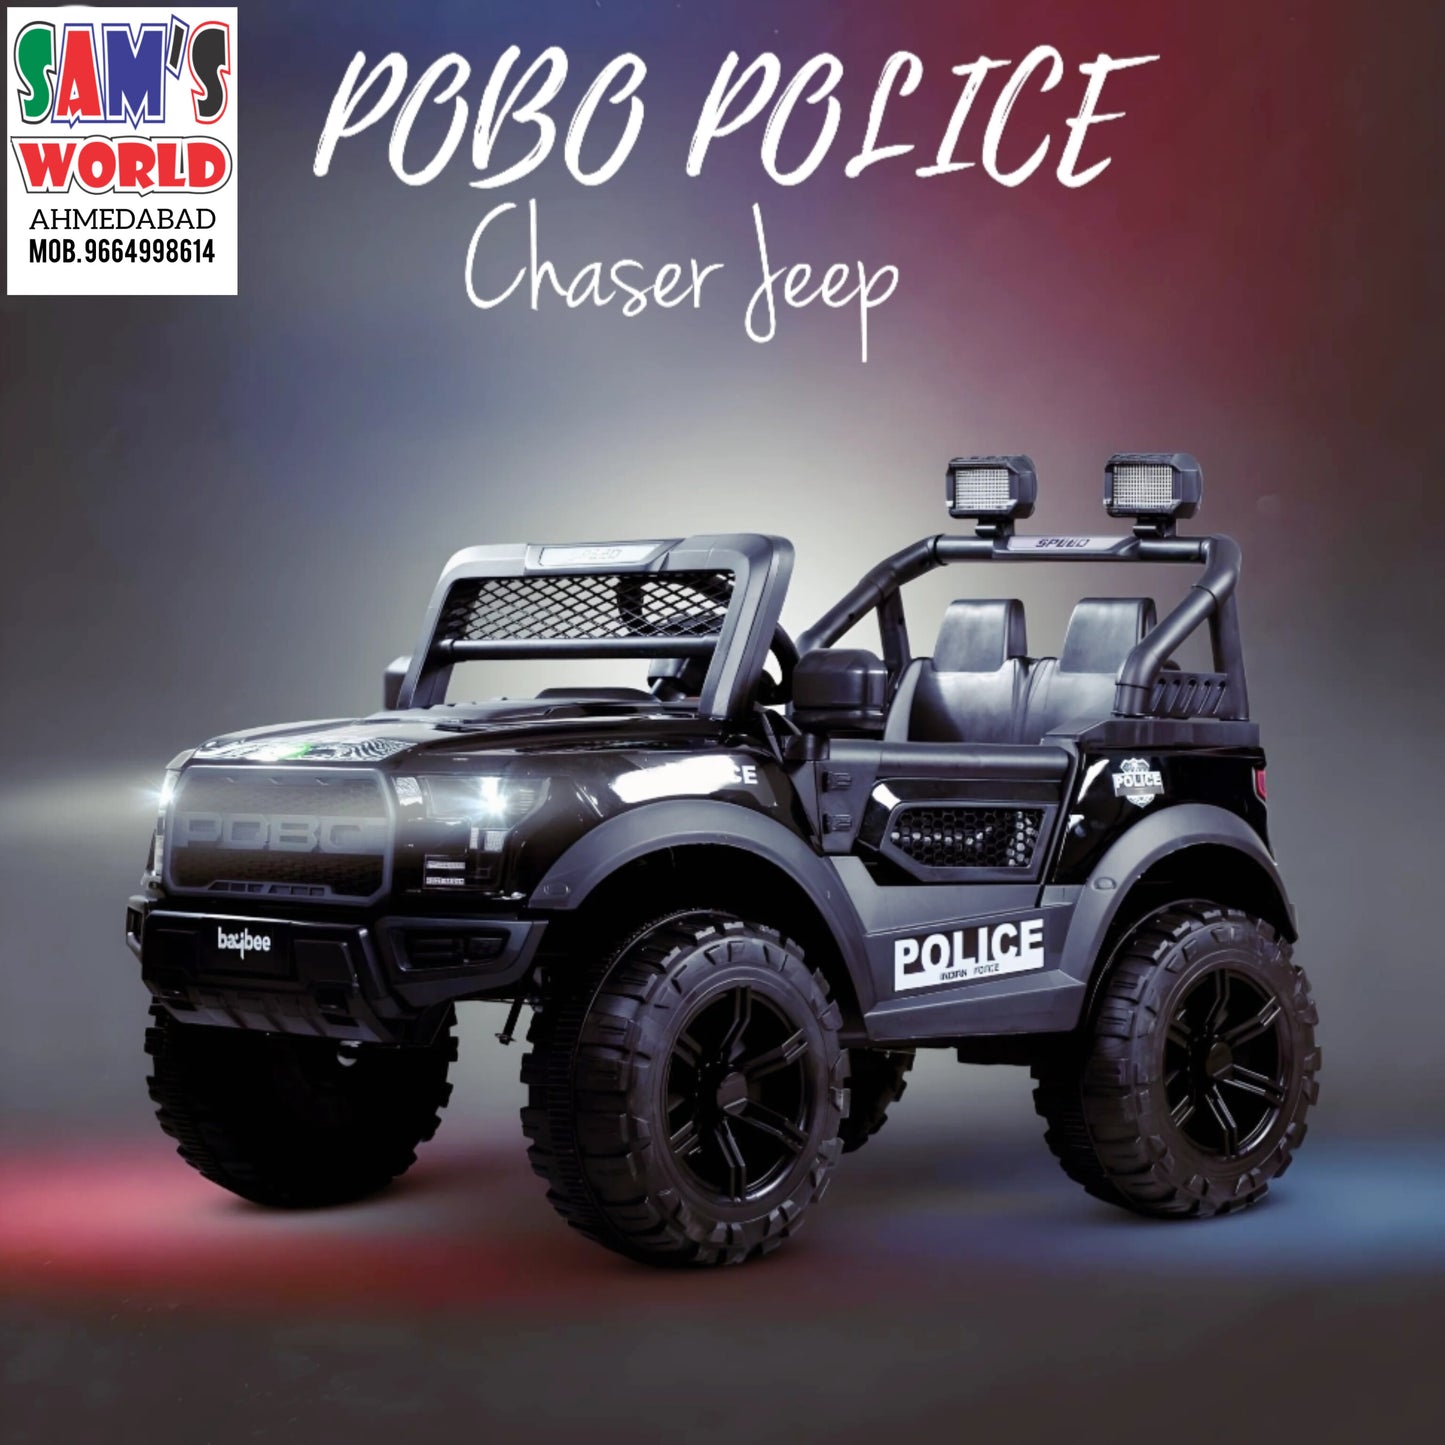 Black Pobo Kids Ride on Jeep with 12V Rechargeable Battery, Music, Lights and Remote Control | sams Toy World | Ahmedabad Gujarat